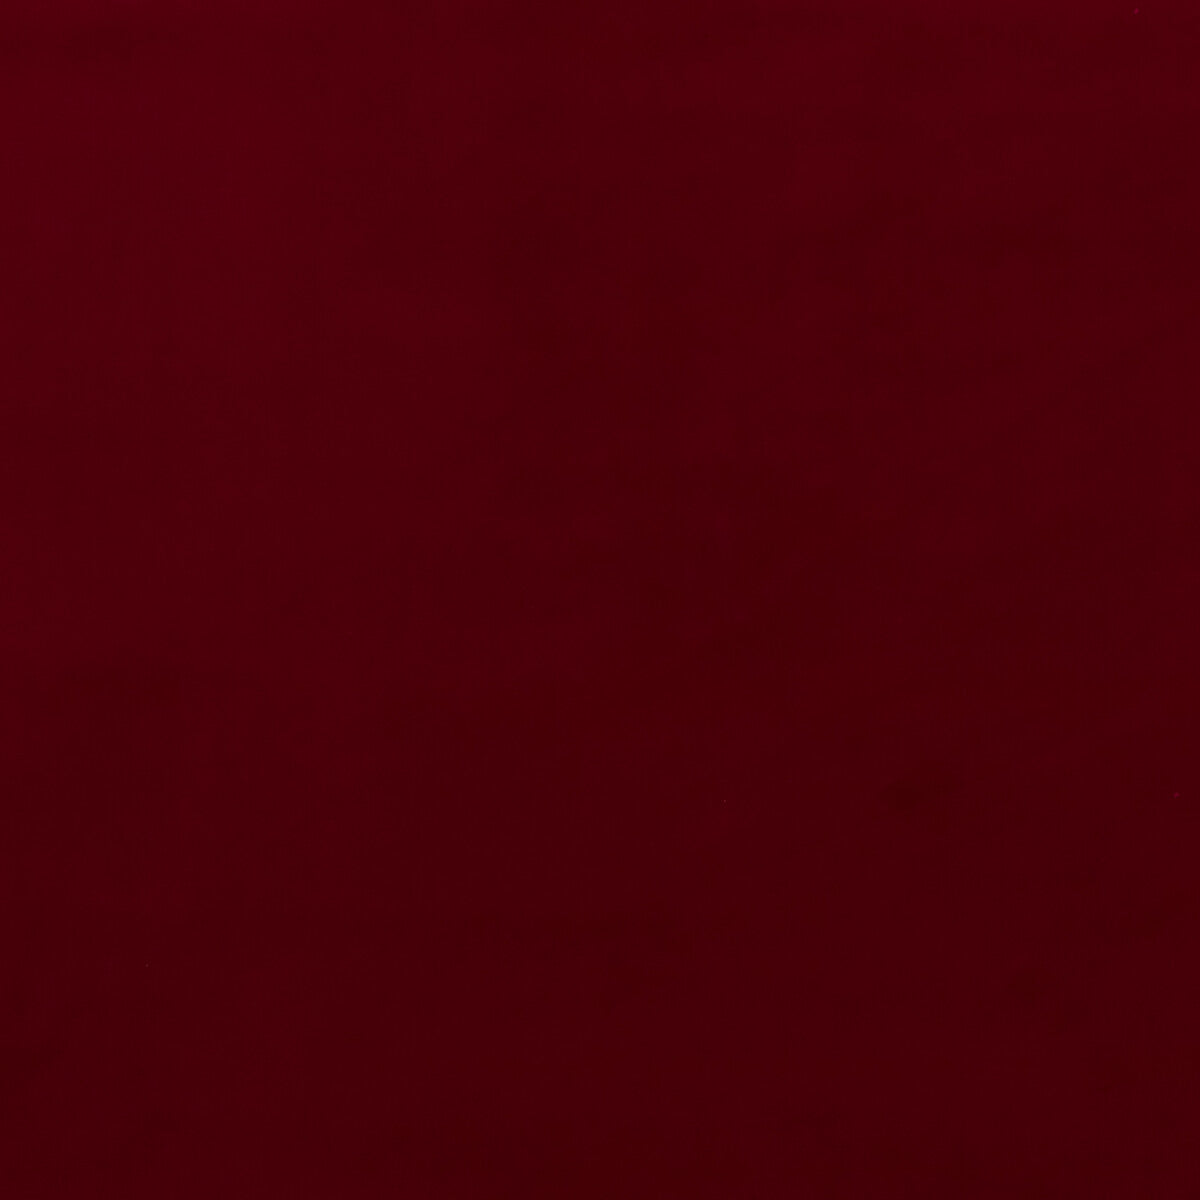 Mulberry Velvet fabric in berry color - pattern FD800.V57.0 - by Mulberry in the Mulberry Velvet collection